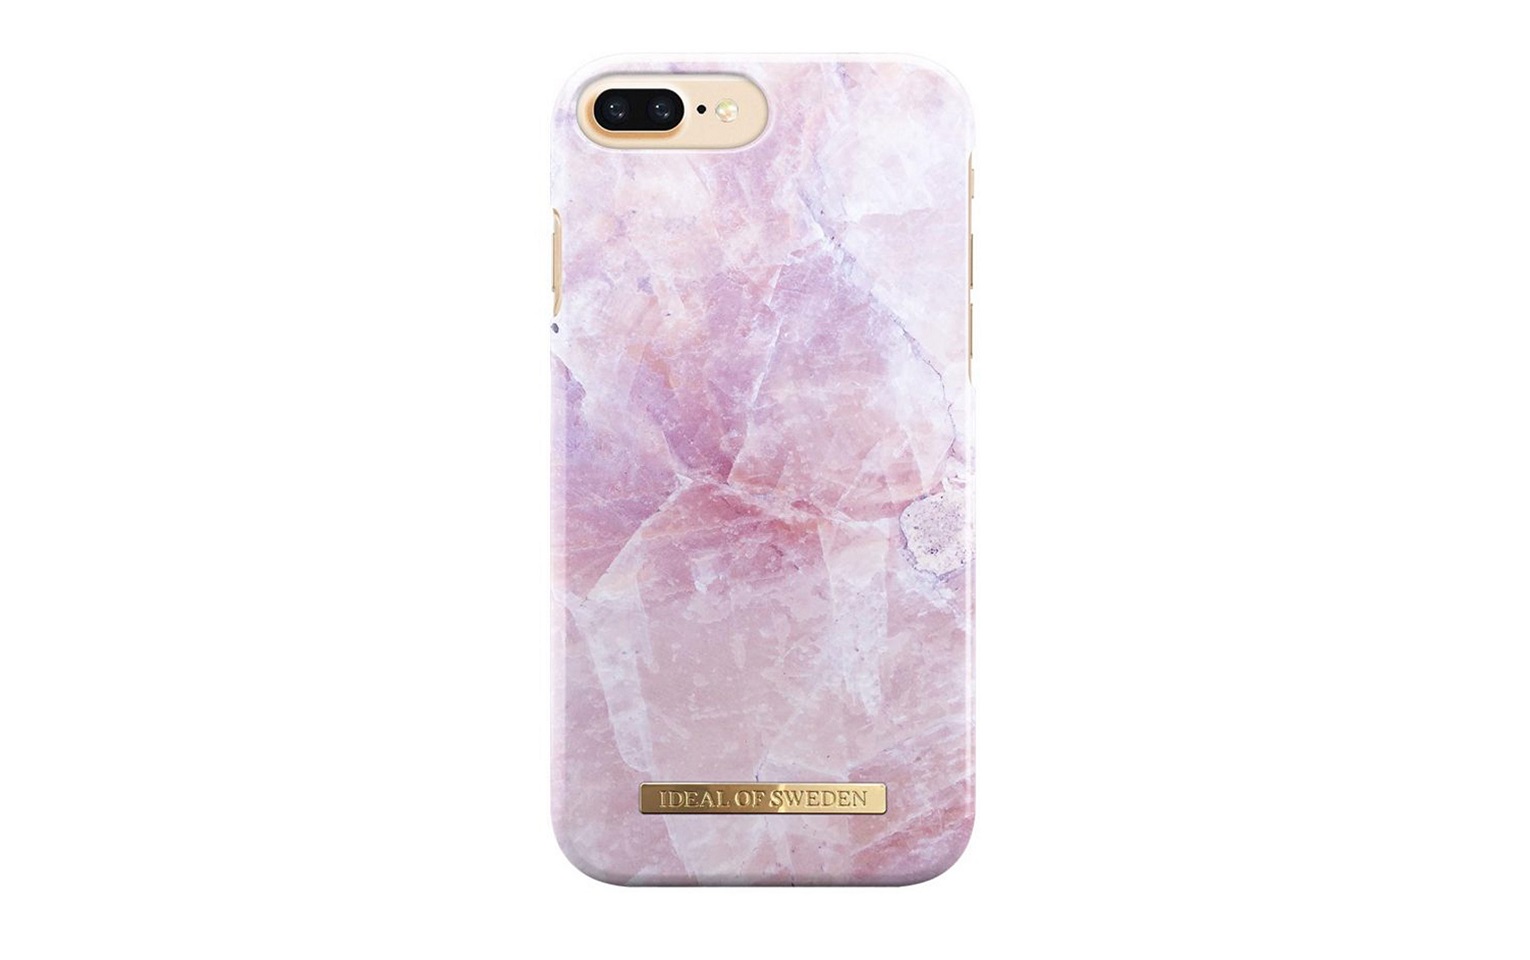 iDeal Fashion Case S/S17 Pilion Pink Marble For iPhone 8/7 Plus